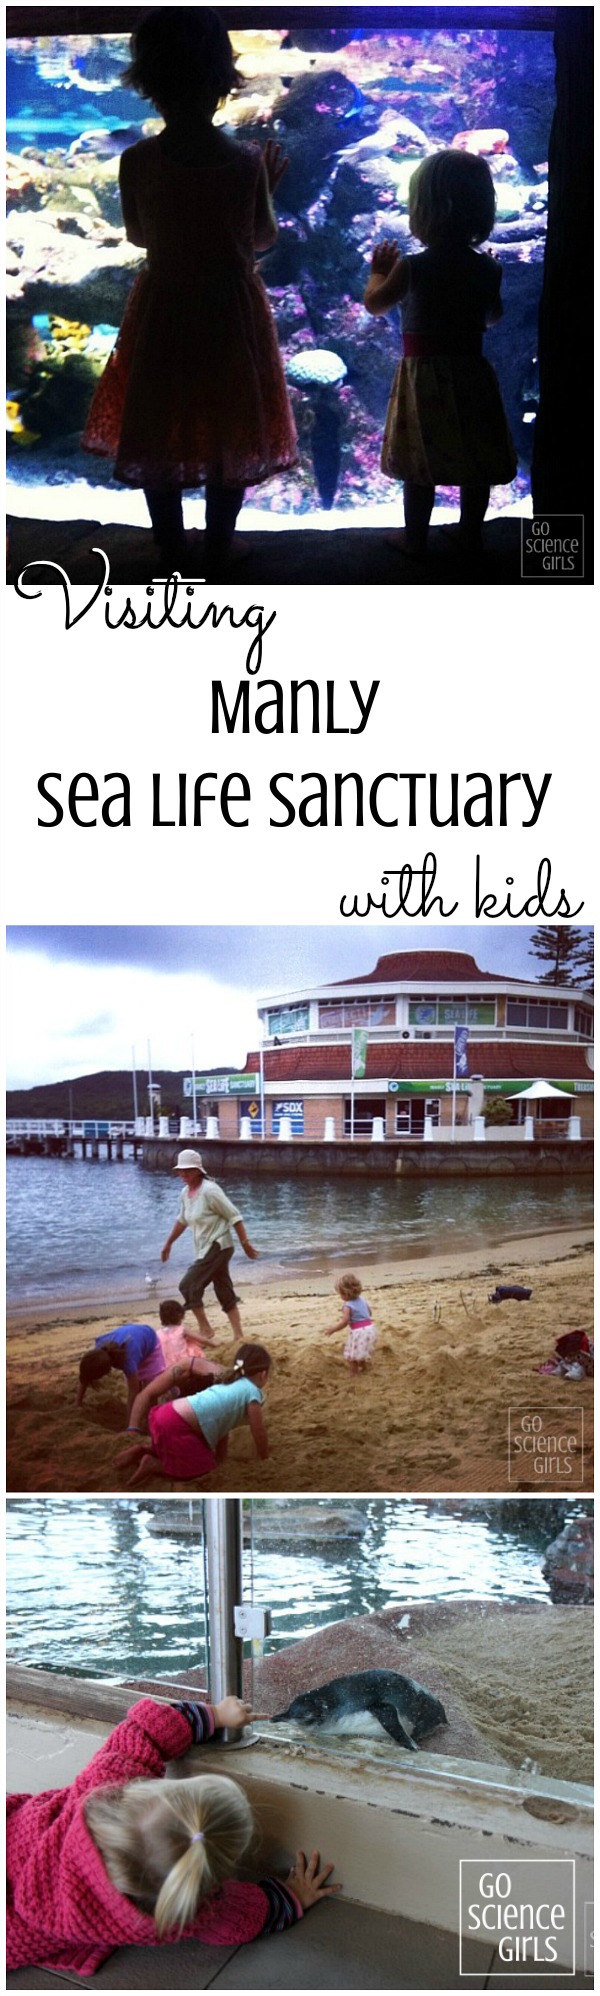 Visiting Manly Sea Life Sanctuary with kids - a review by Go Science Kids